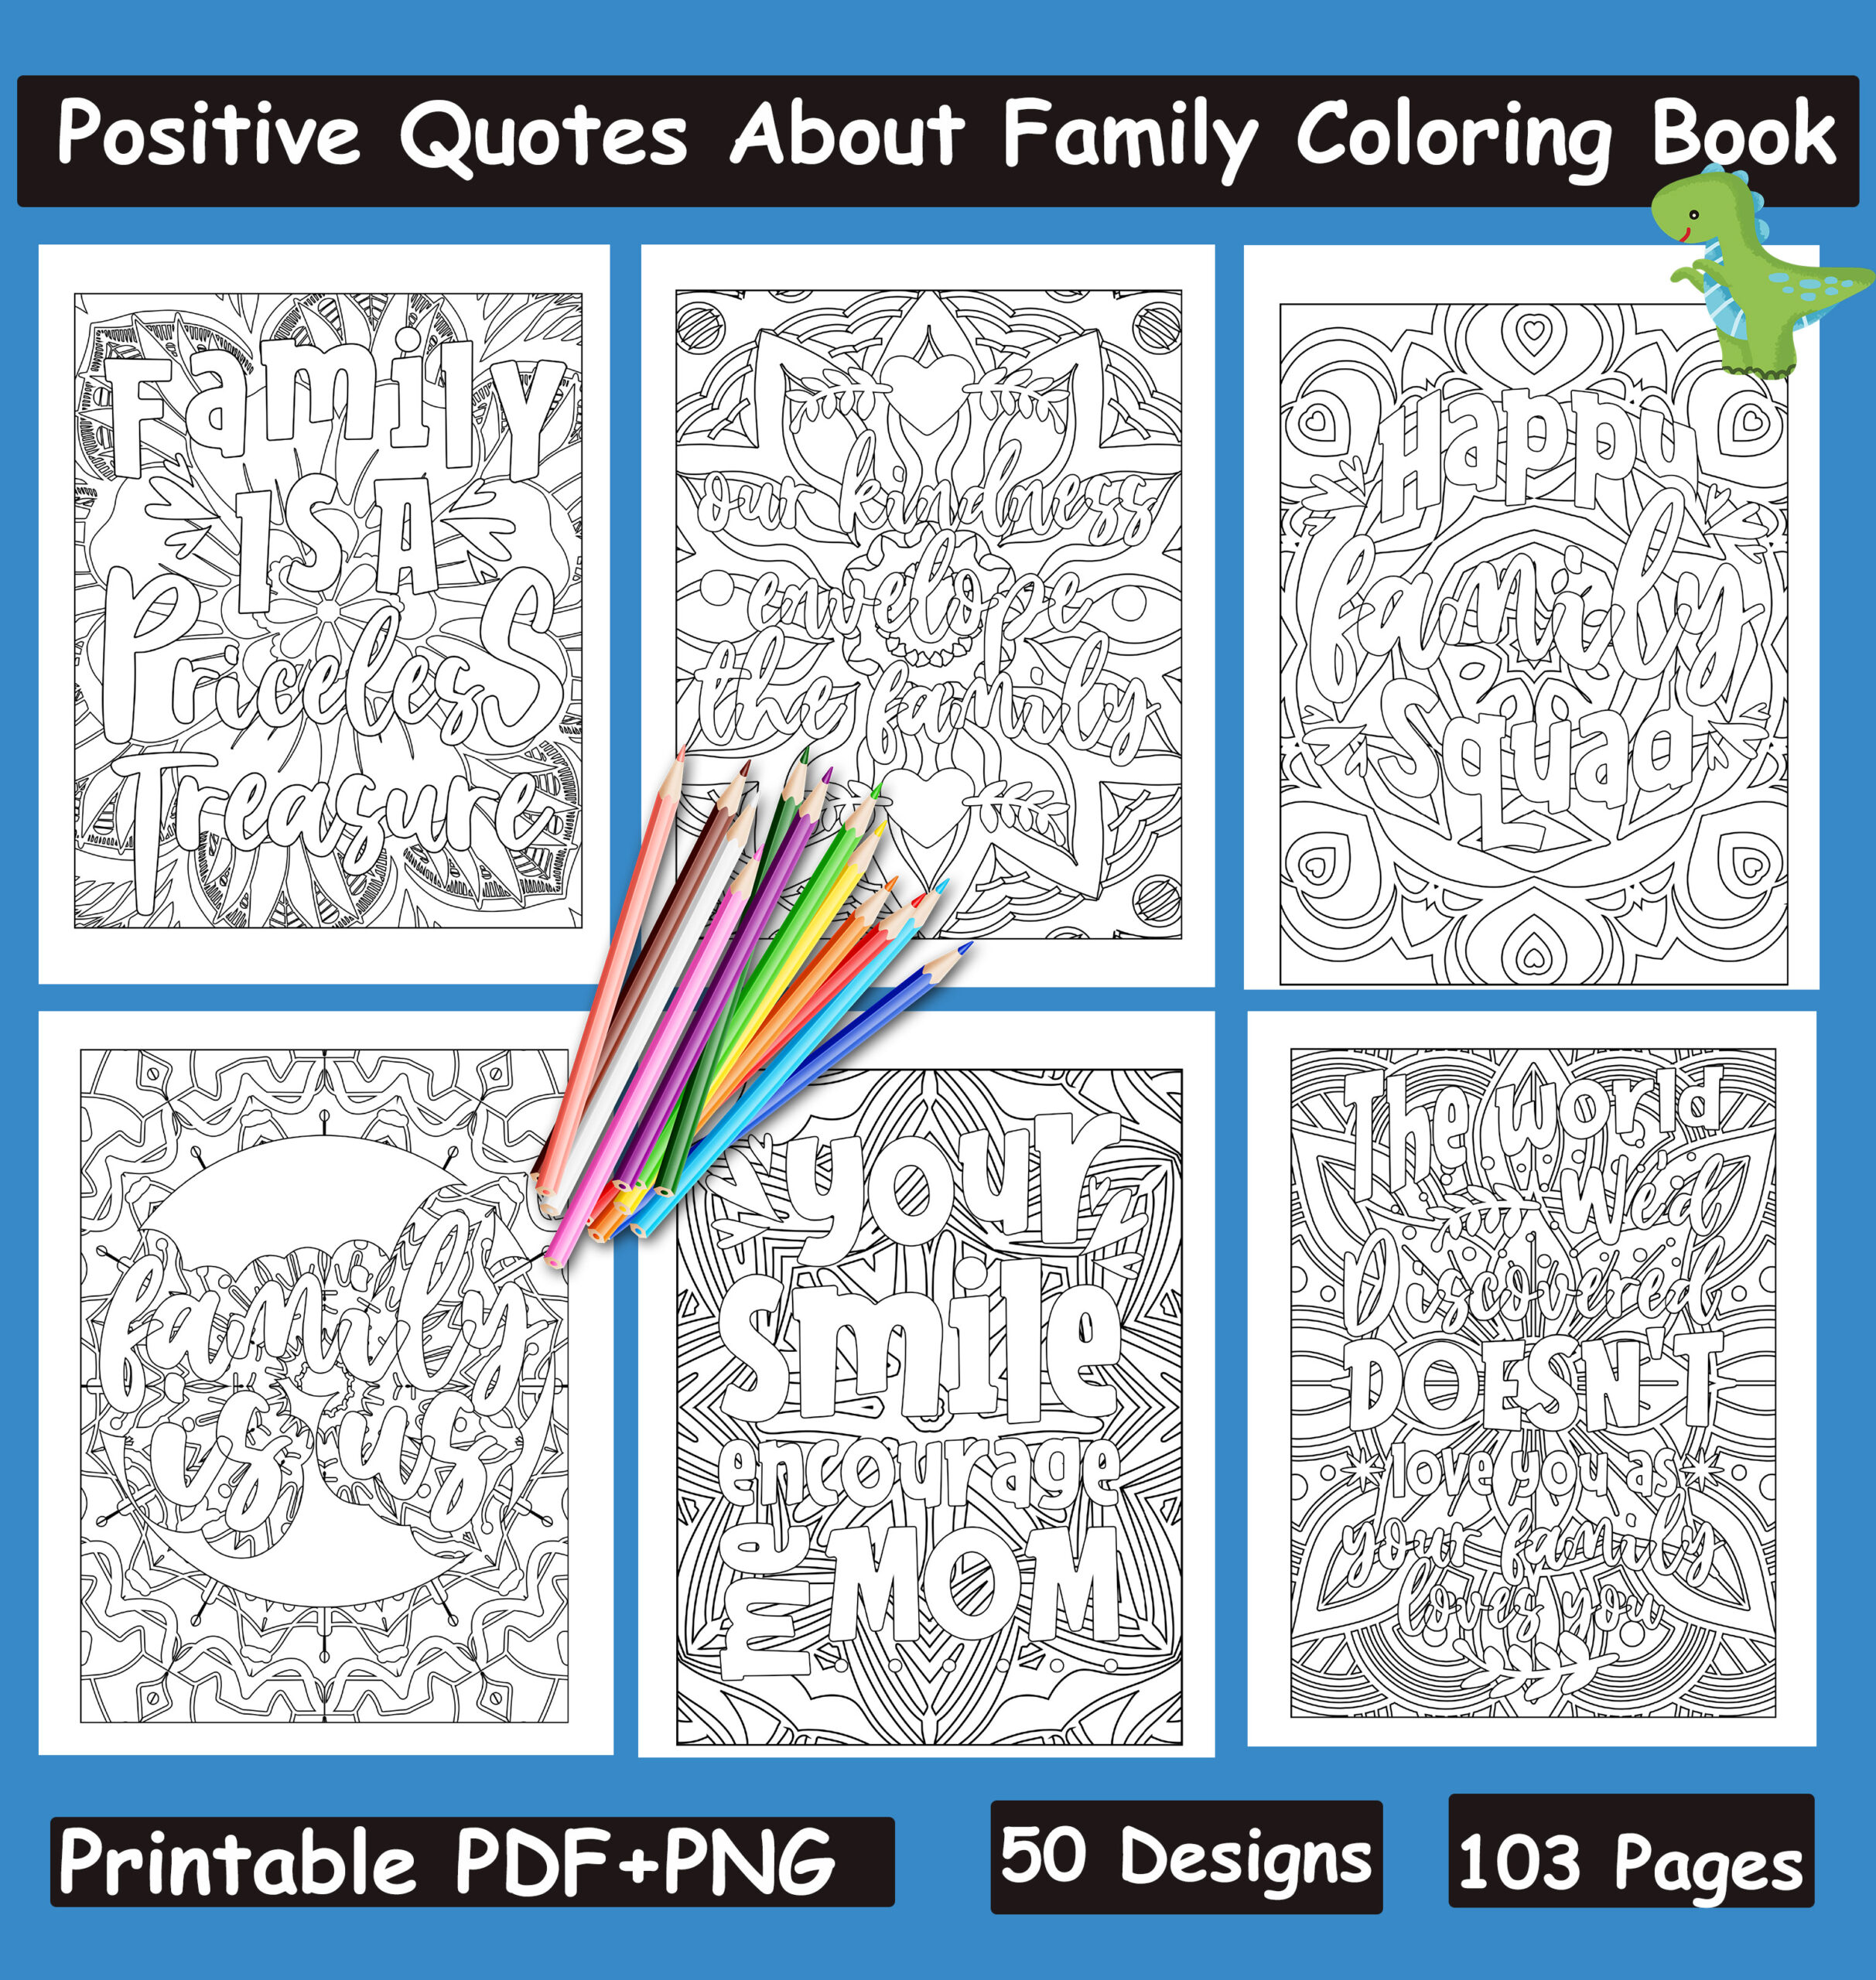 Inspirational quotes about family coloring book for adults and kids family loving quotes made by teachers